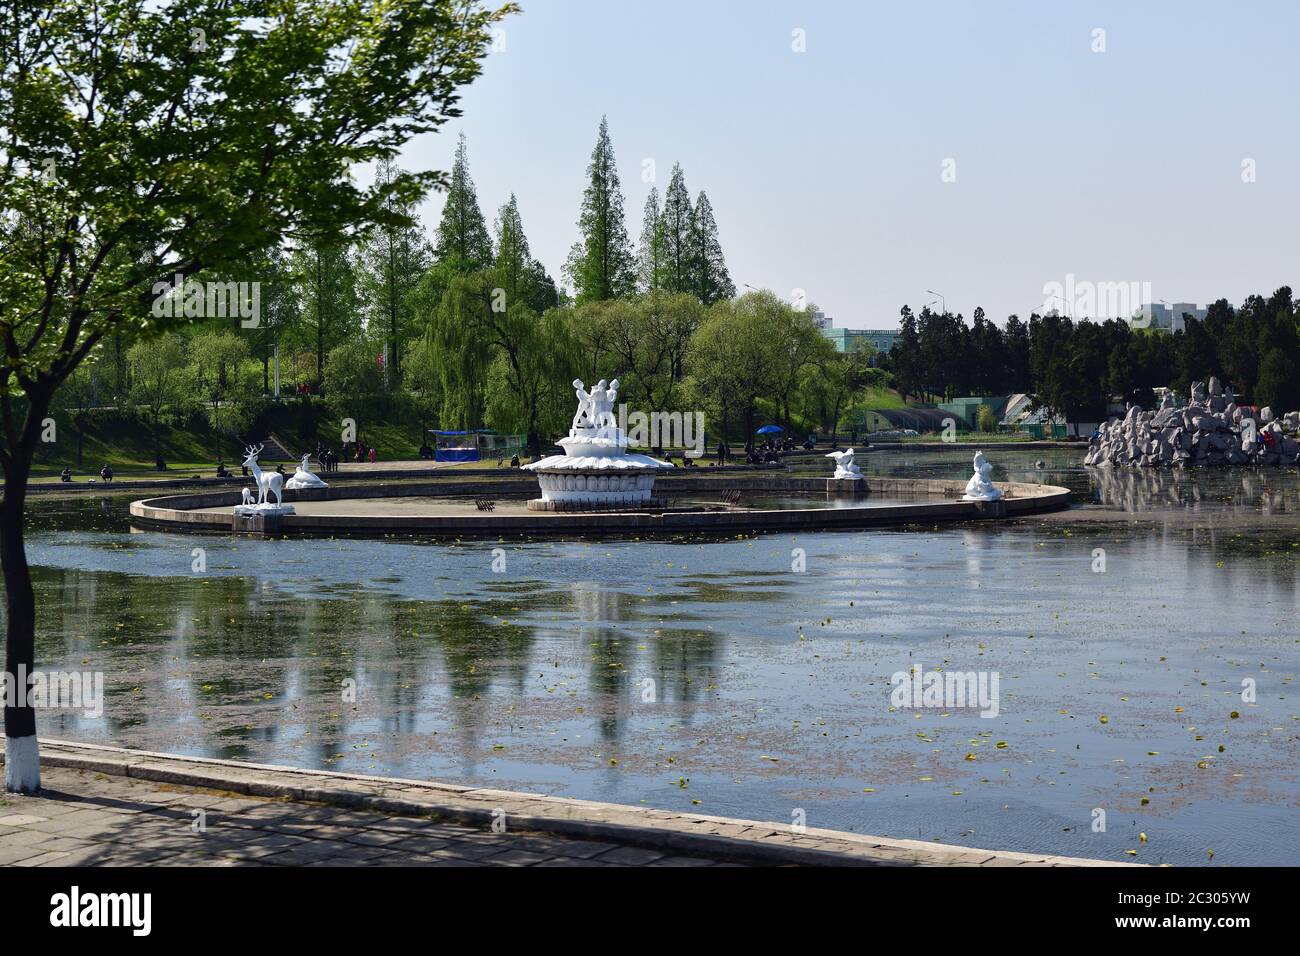 Pyongyang, North Korea - May 2, 2019: View of an Pyongyang outskirts, park with a pond and a fountain with characters from children's fairy tales Stock Photo